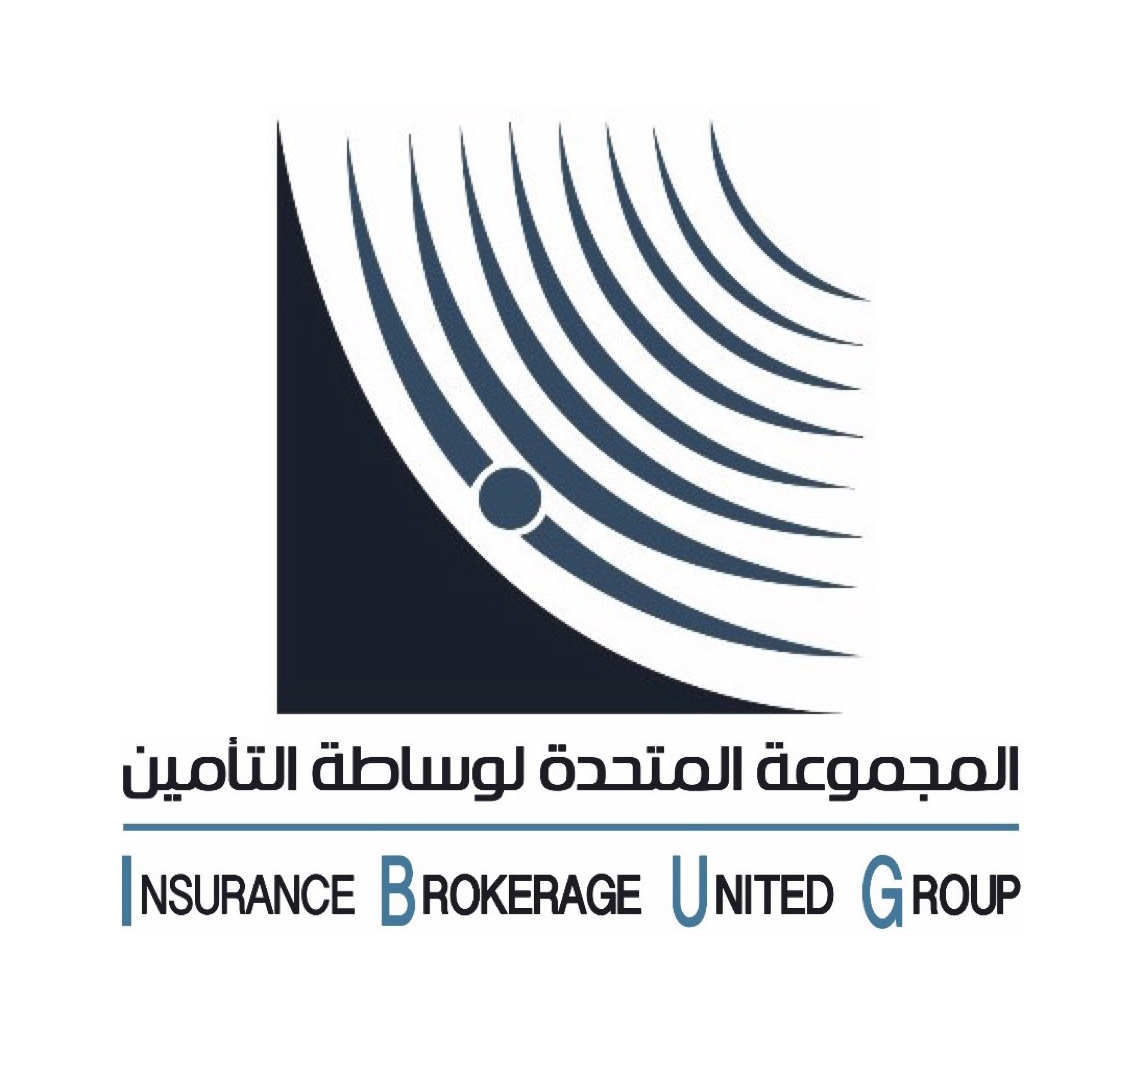 The French “SPVIE” intends to acquire 25% of “United Insurance Brokerage”